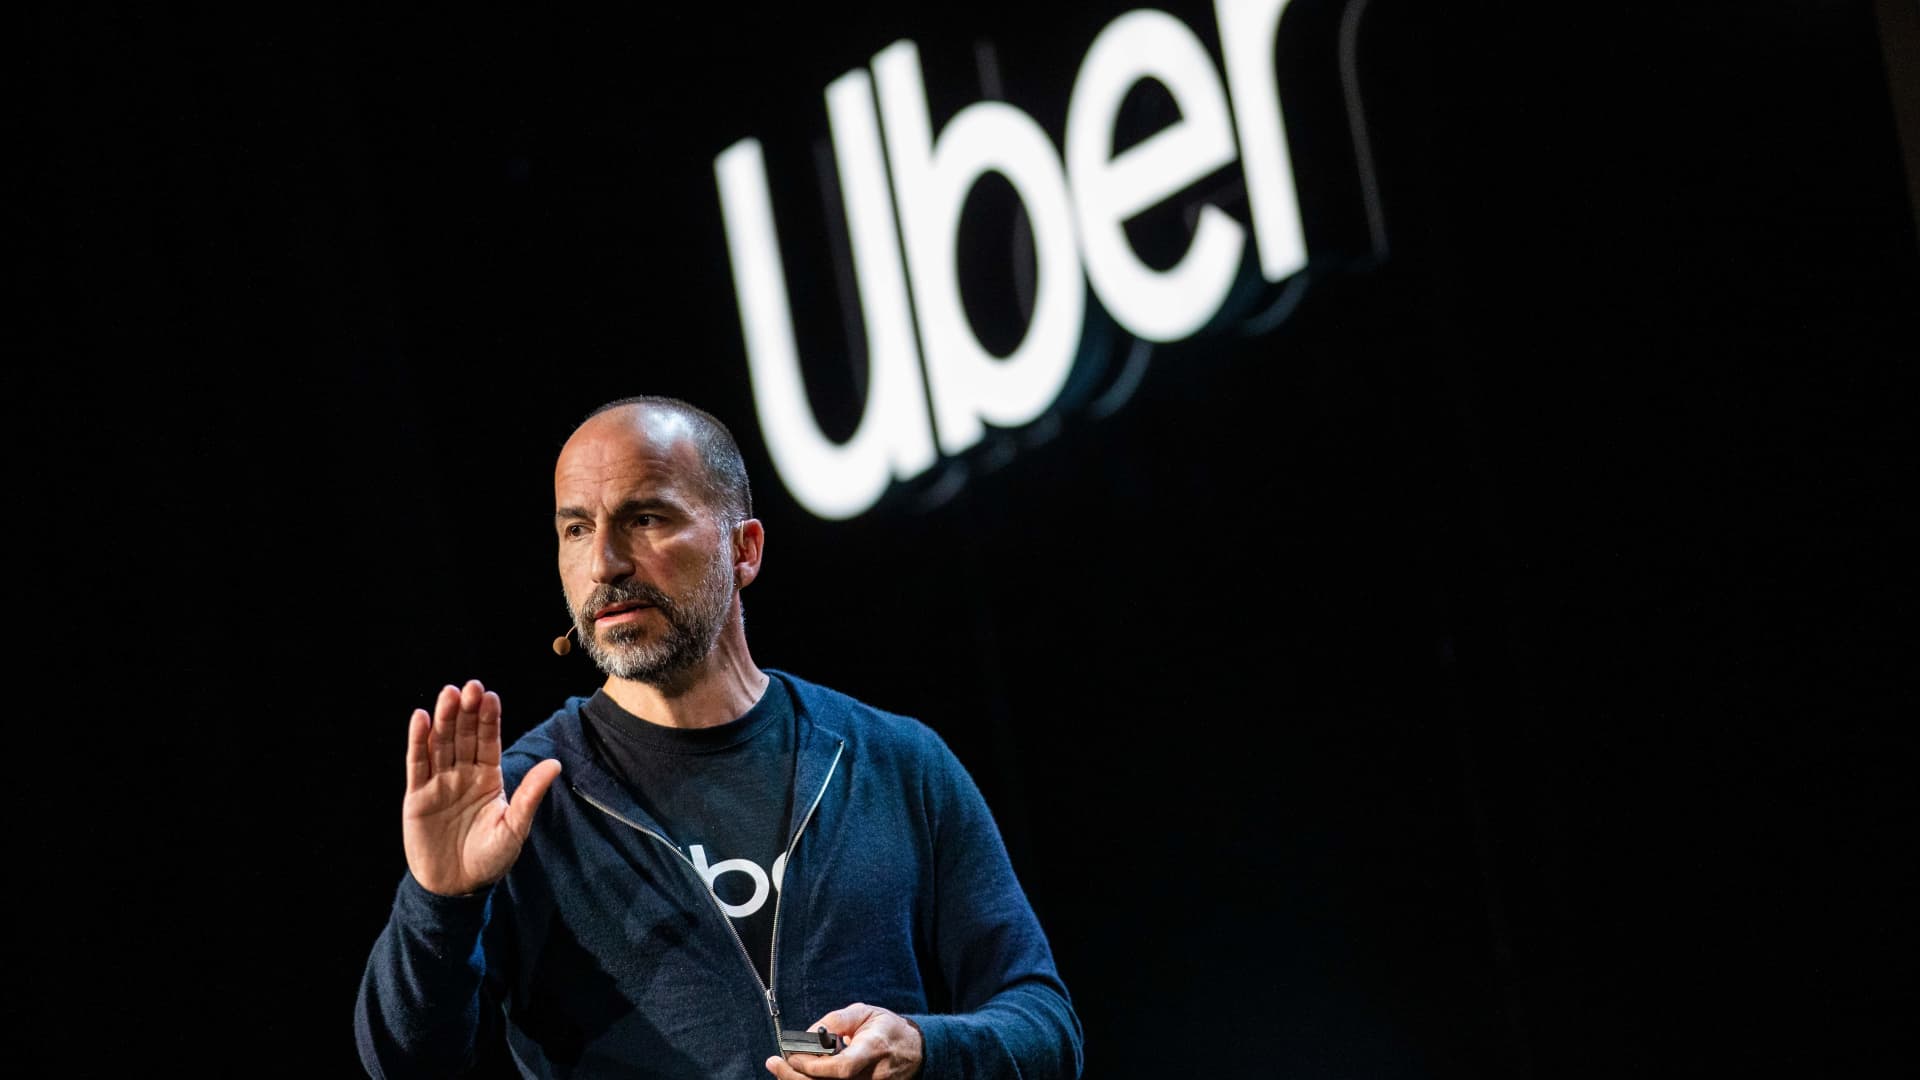 Uber CEO Dara Khosrowshahi speaks at a product launch event in San Francisco, California on September 26, 2019.